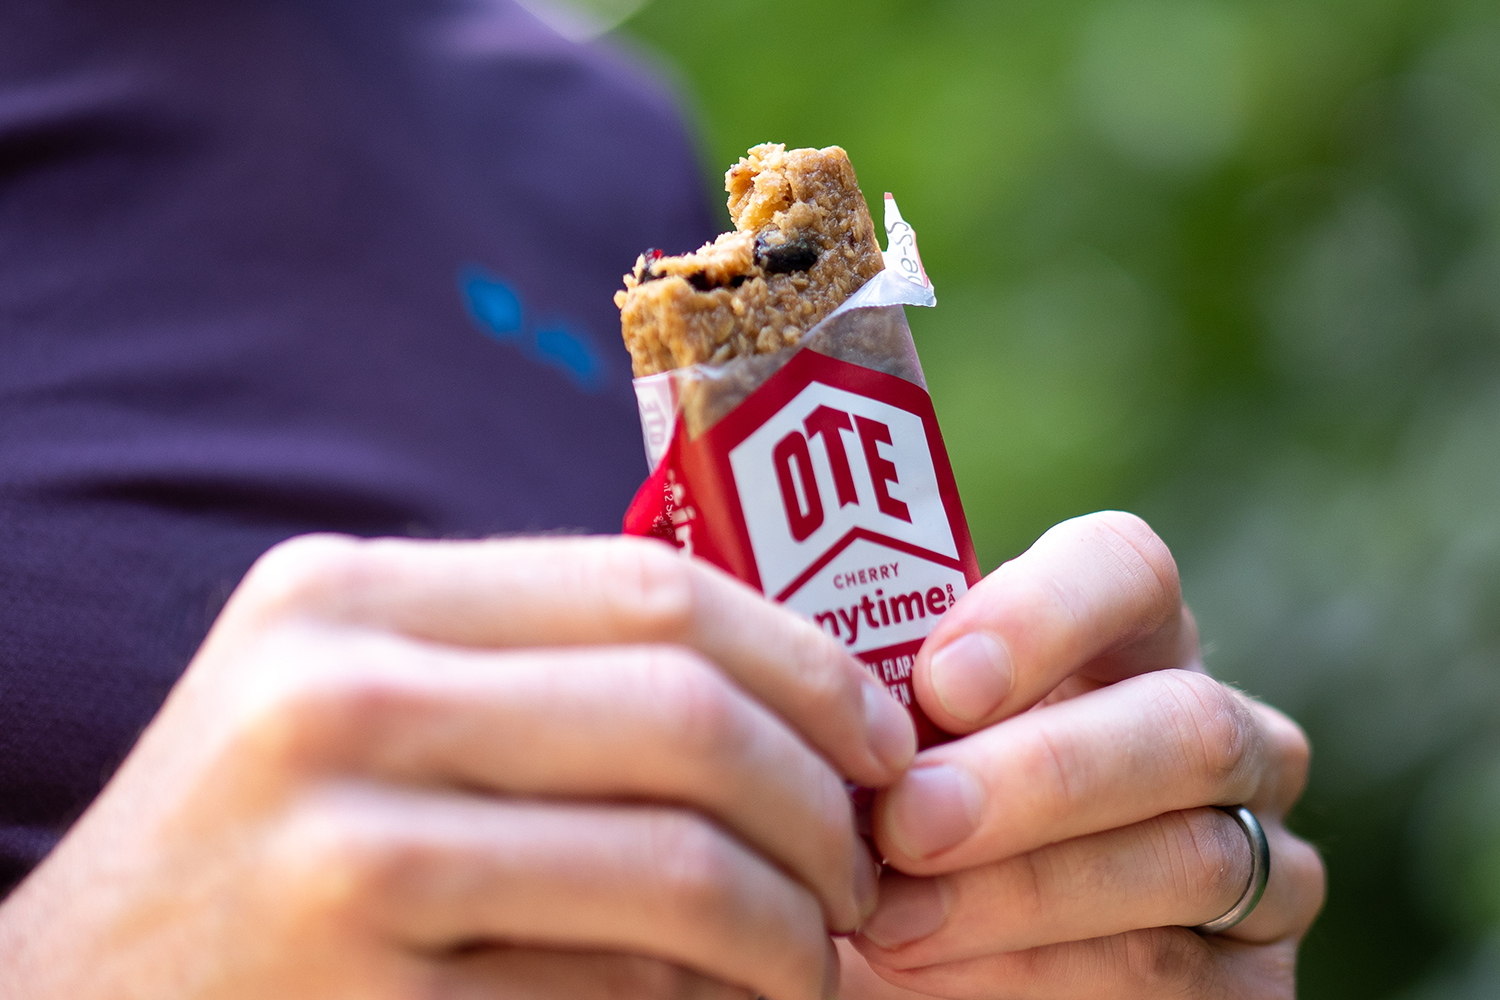 Anytime Bars are a great way to take on board carbohydrates for exercise.